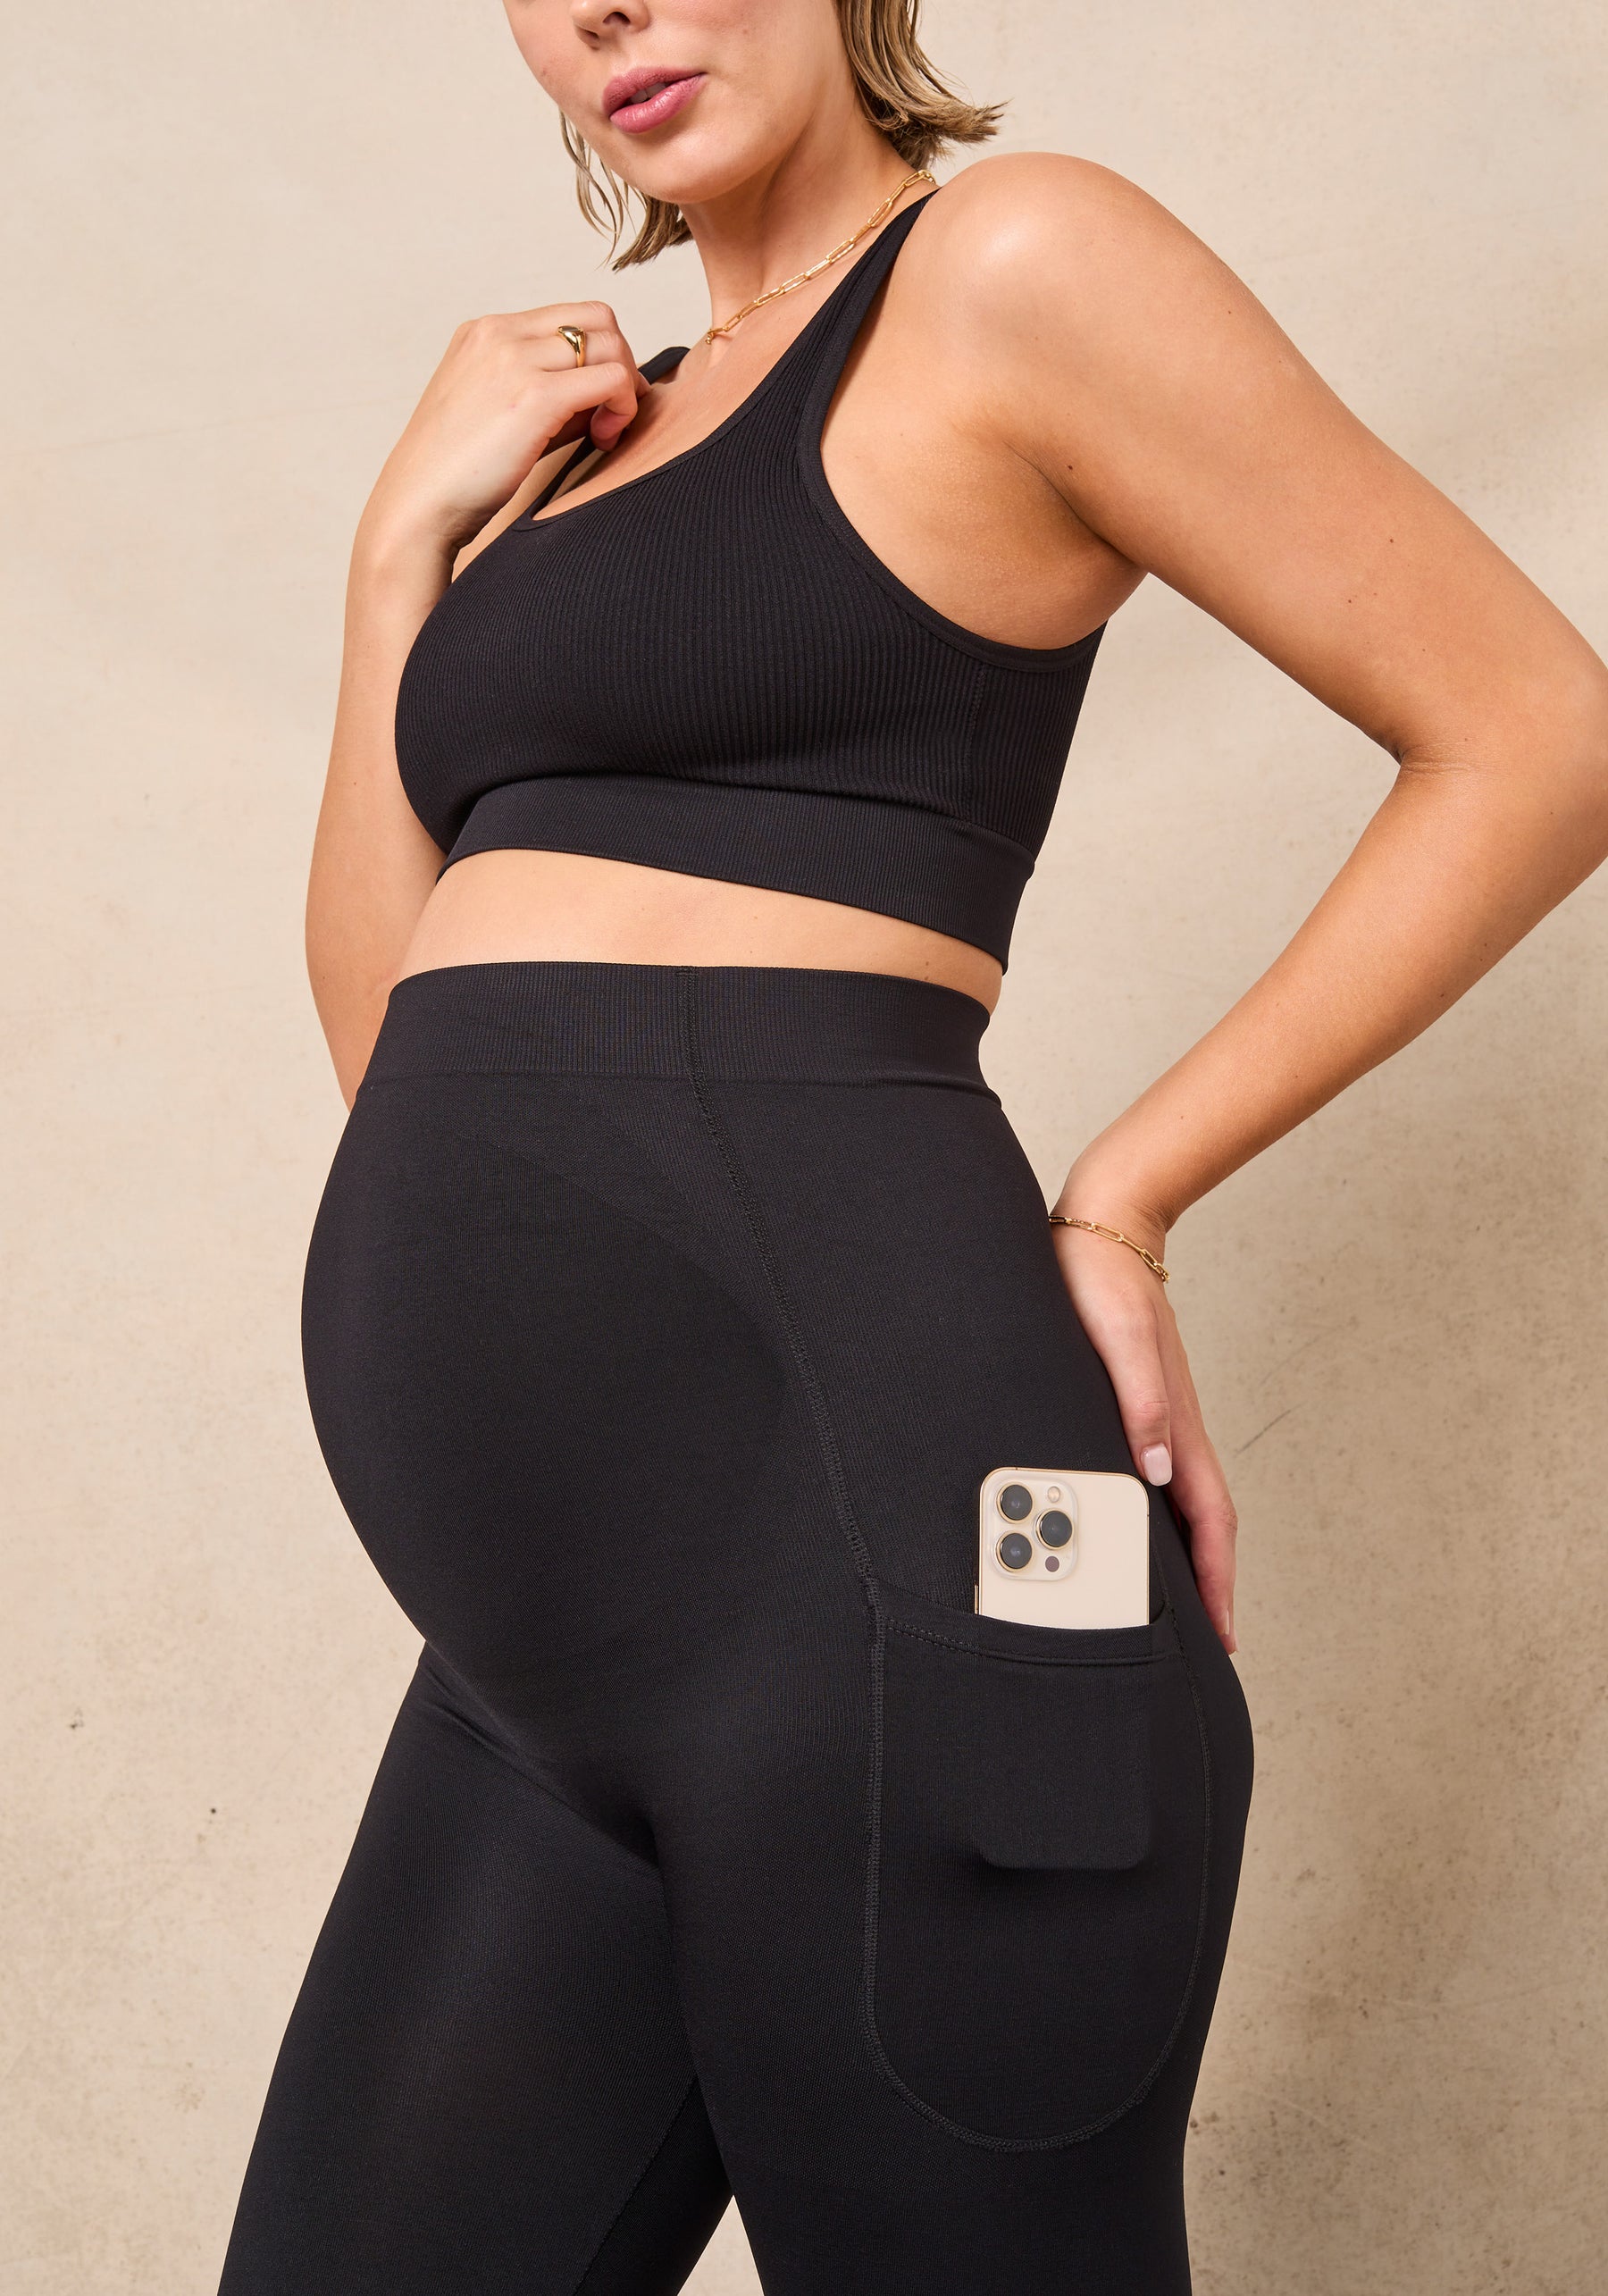 Dani Green on X: Talk about maternity leggings #FAIL @hmsouthafrica, you  can see my undies, leggings are completely see-through!! What the..?!!   / X